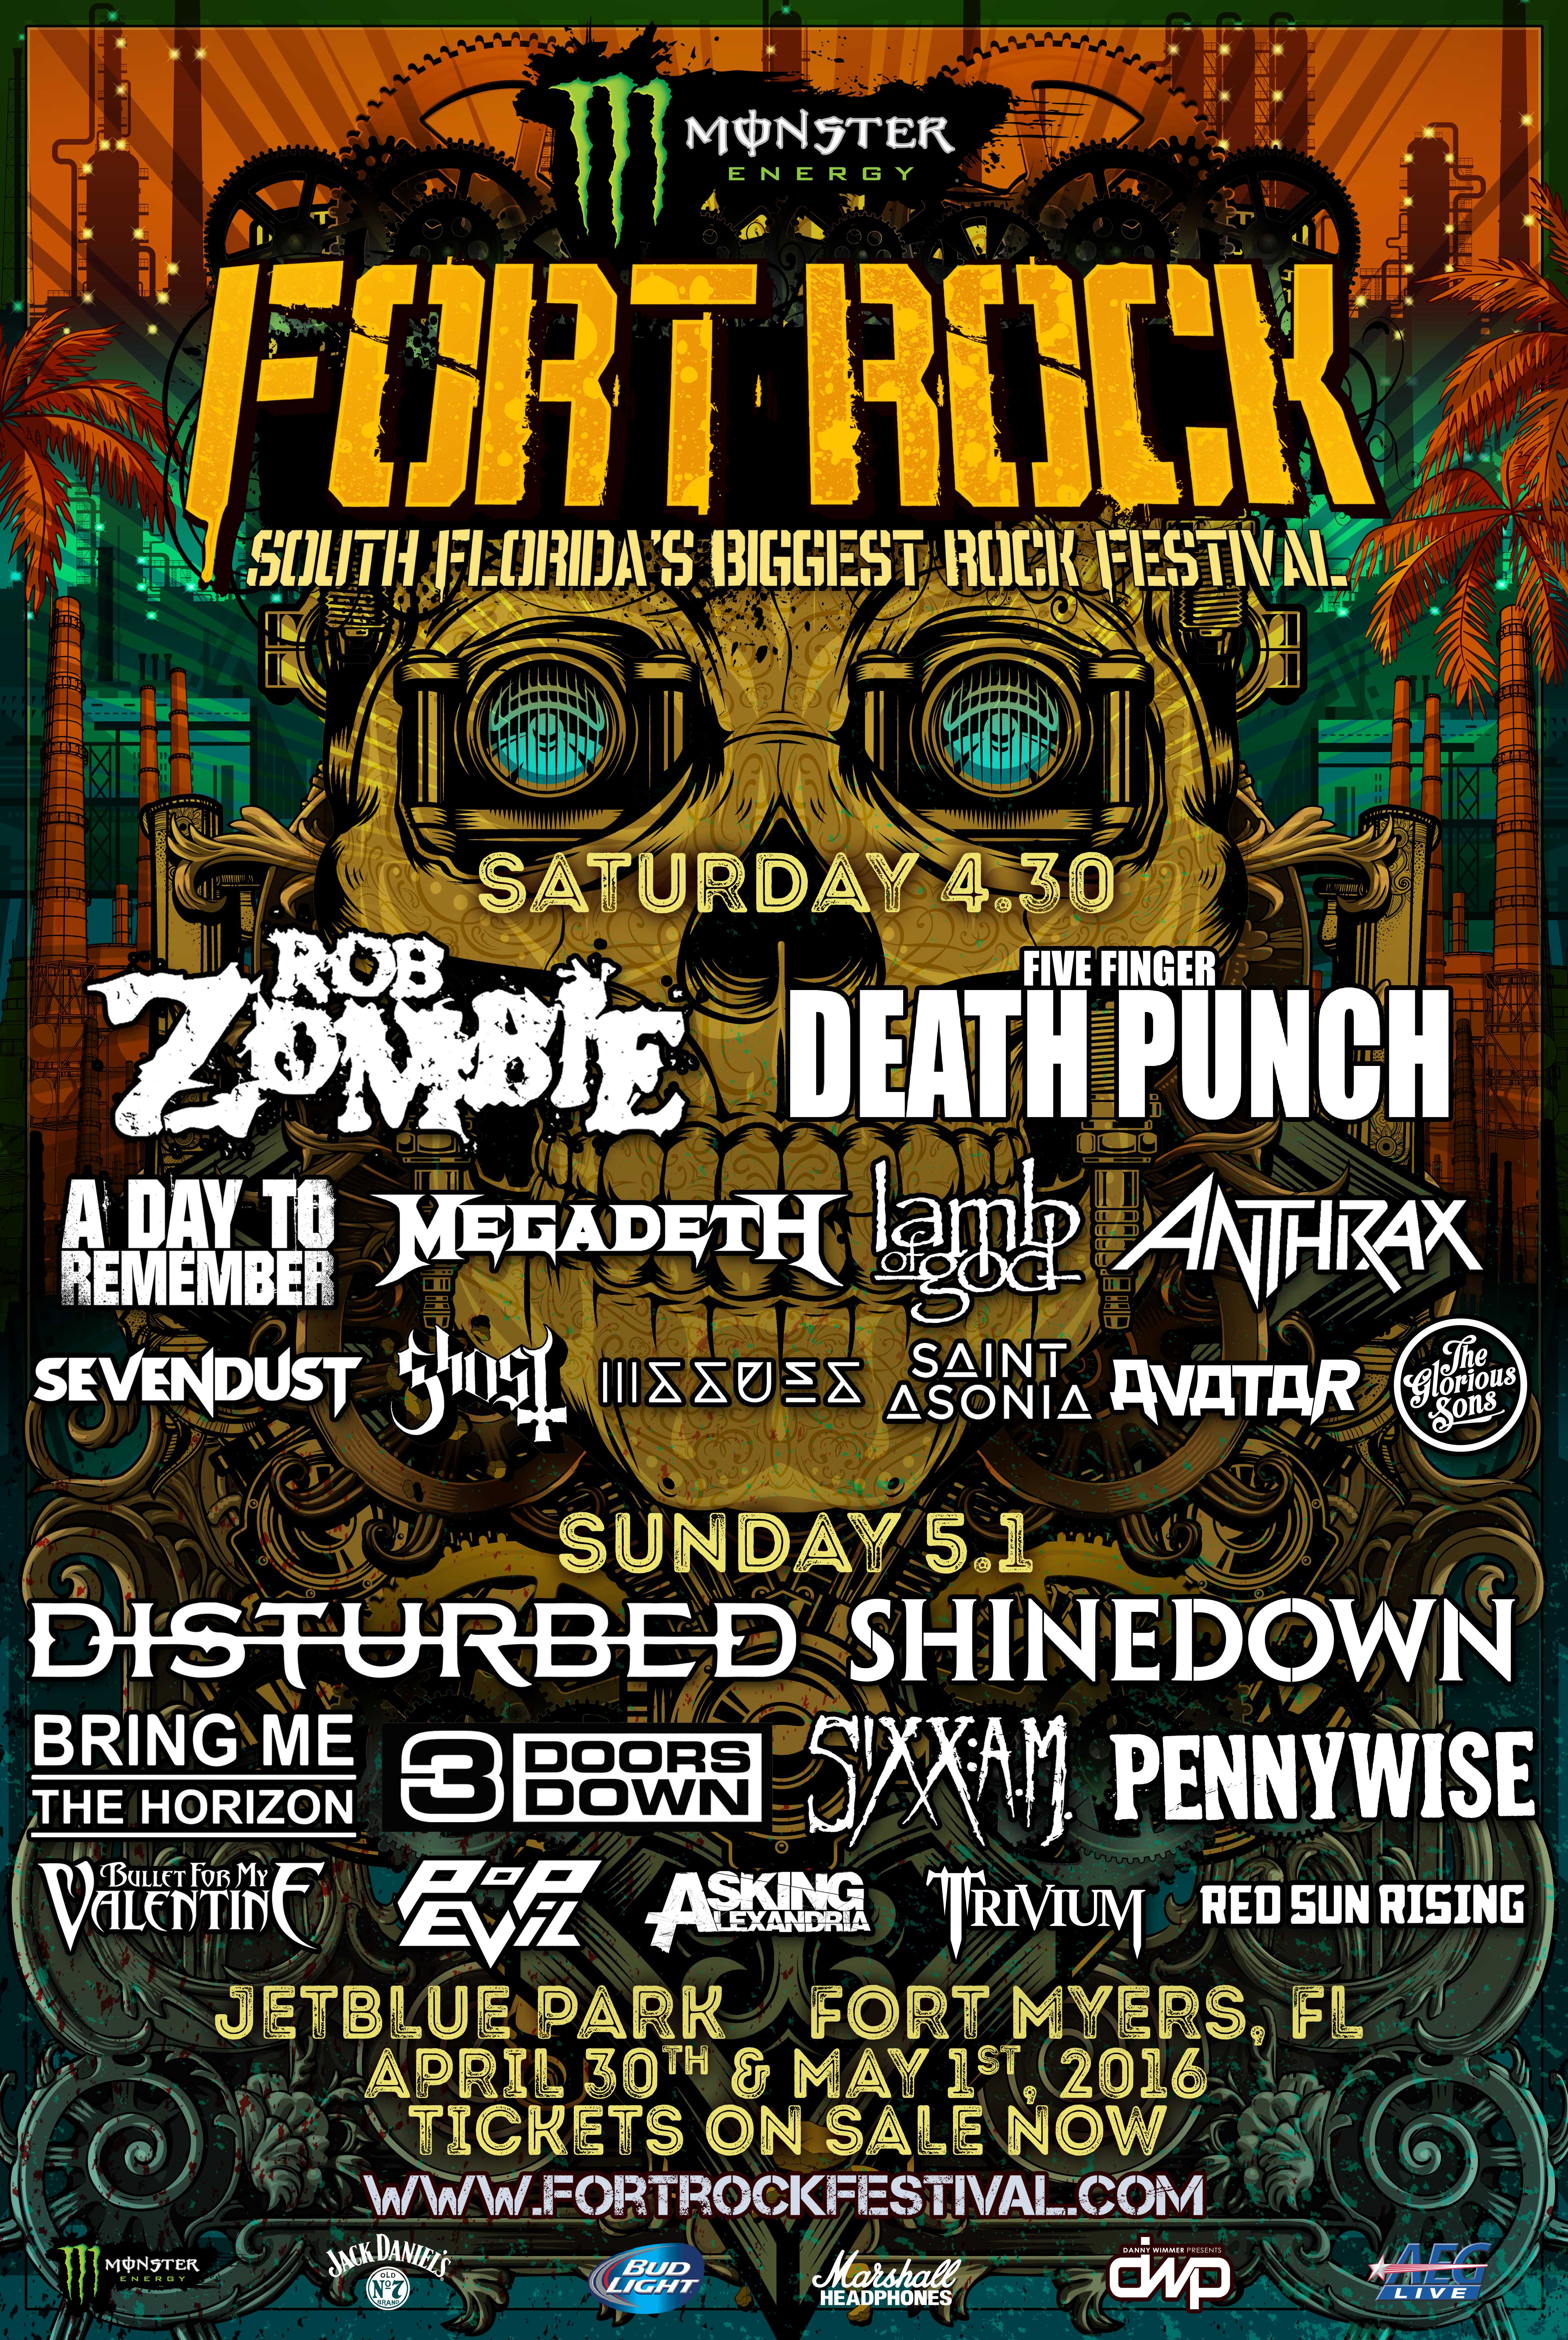 Monster Energy Fort Rock: April 30 & May 1 at JetBlue Park in Fort Myers, FL (Rob Zombie, Disturbed, Shinedown, Five Finger Death Punch & many more)